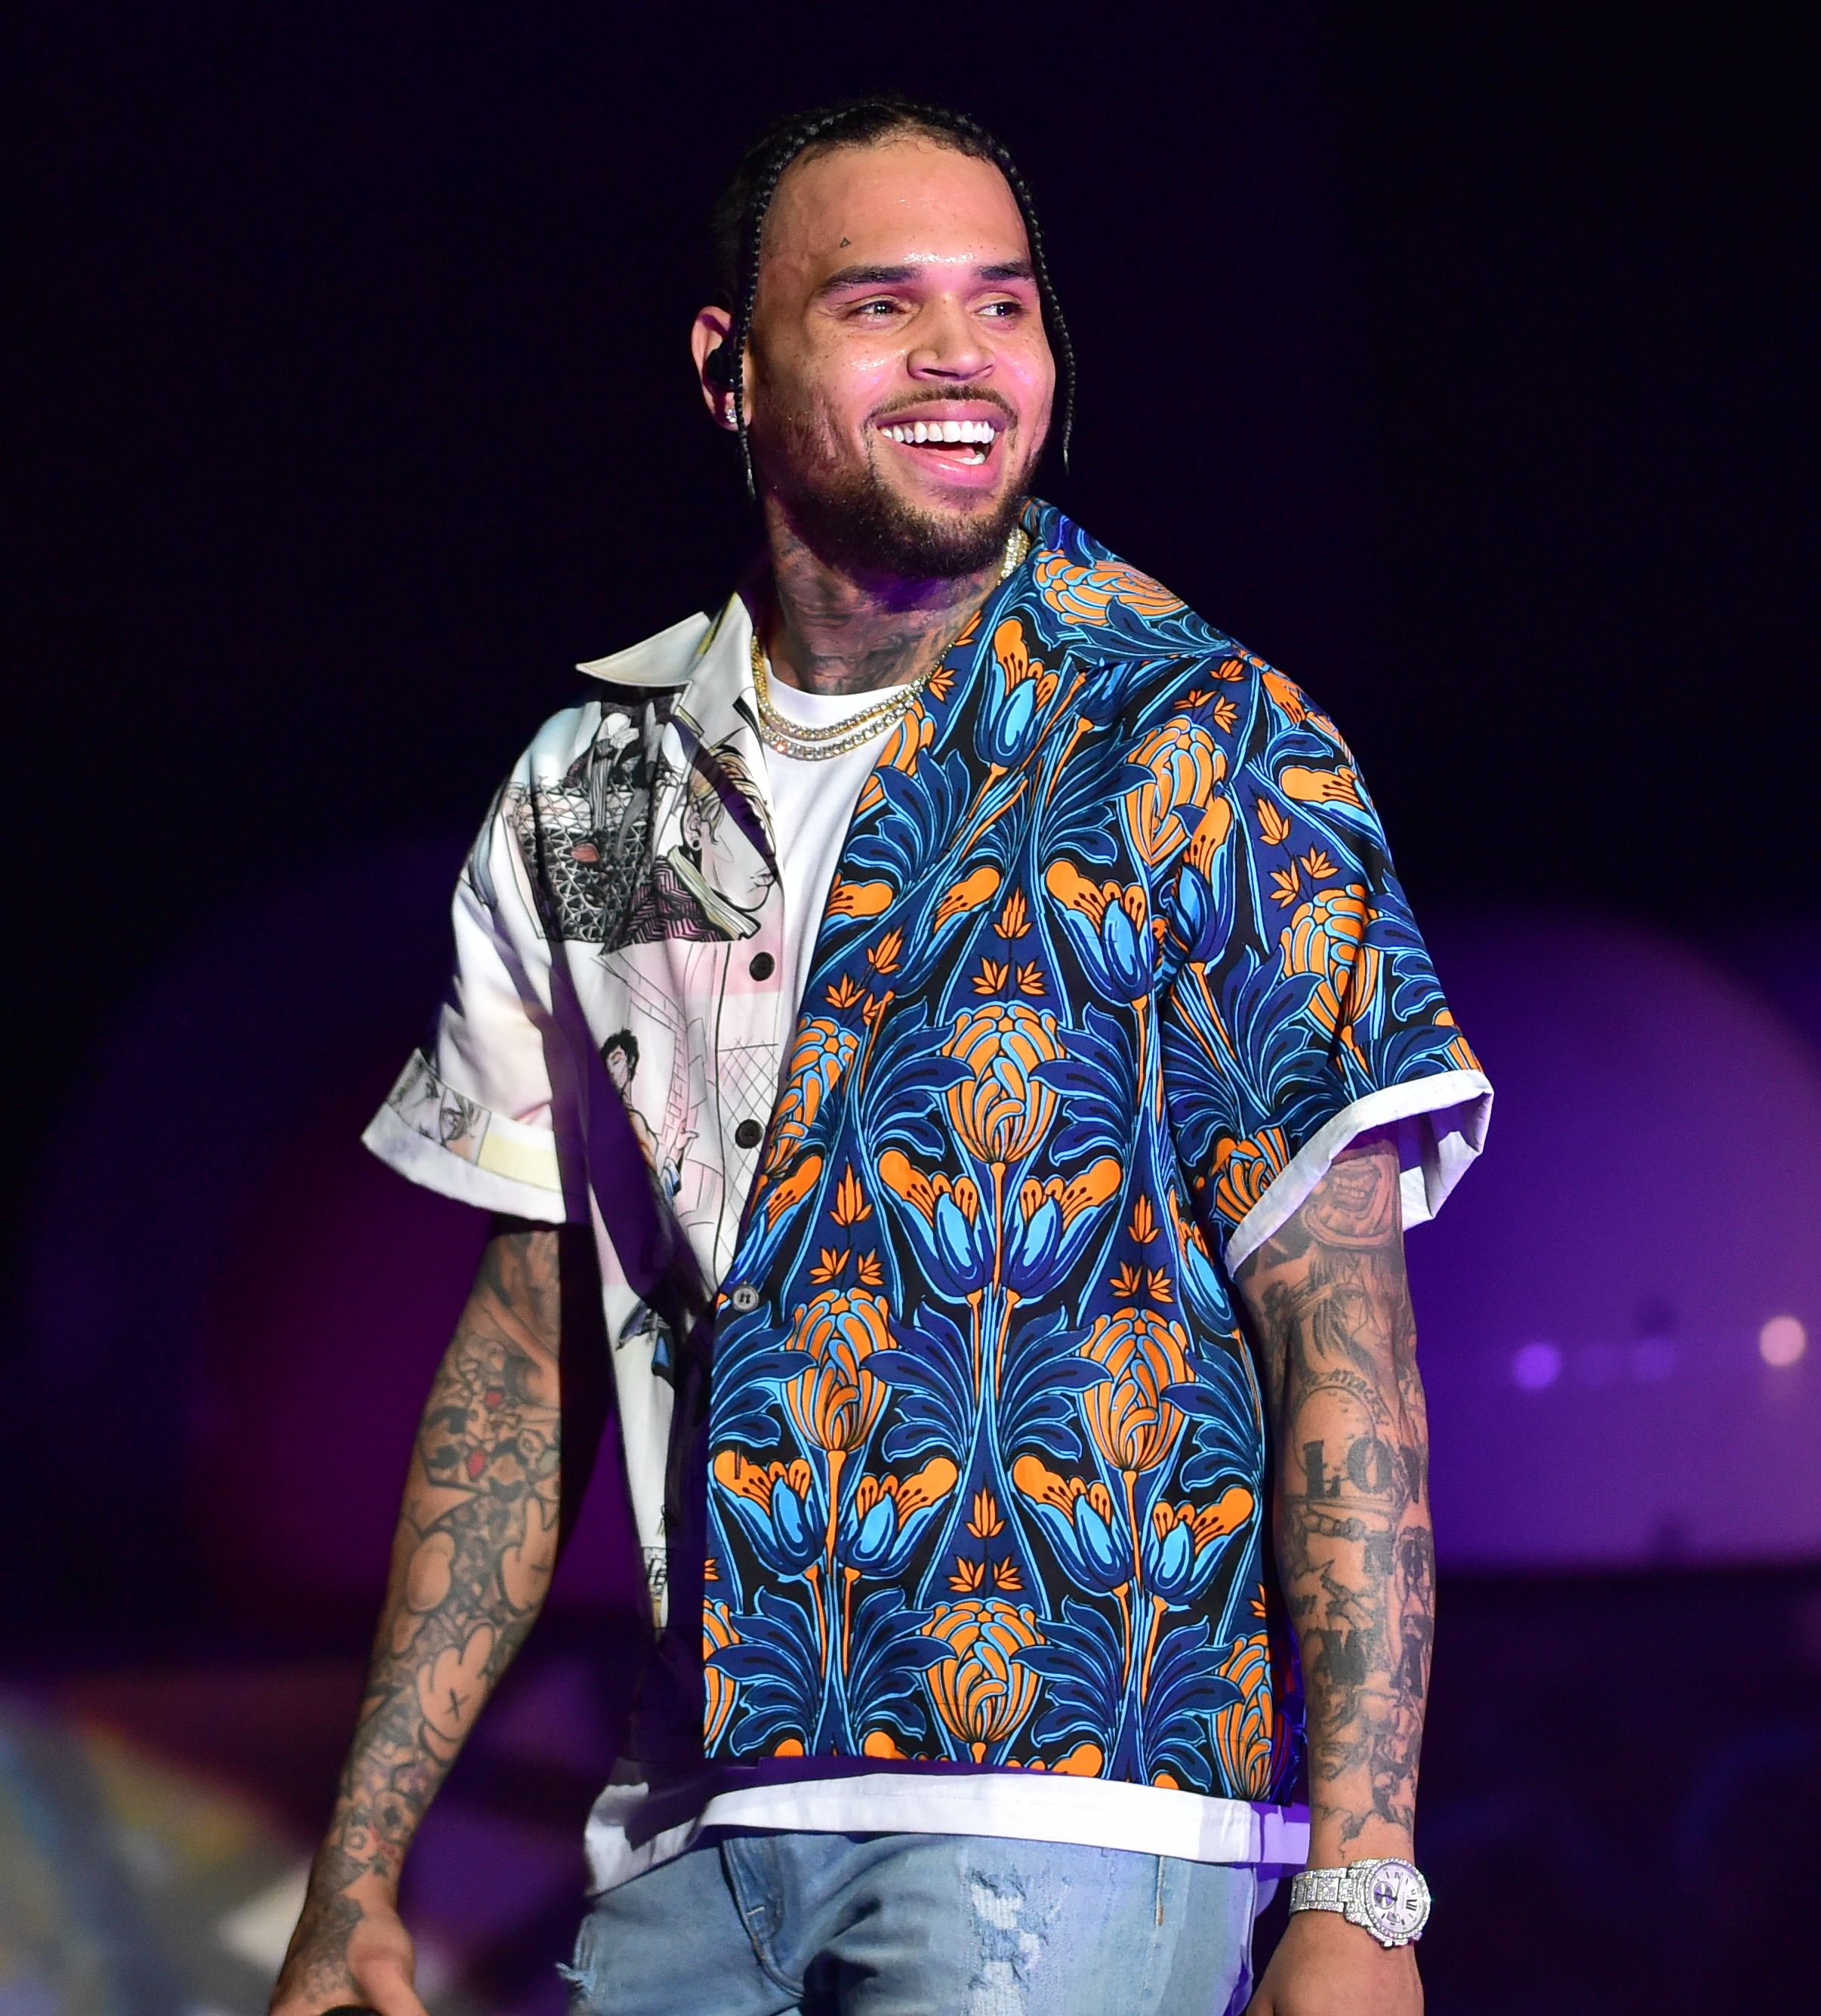 Chris Brown performs at 2019 Tycoon Music Festival at Cellairis Amphitheatre at Lakewood on June 8, 2019 in Atlanta, Georgia | Photo: Getty Images